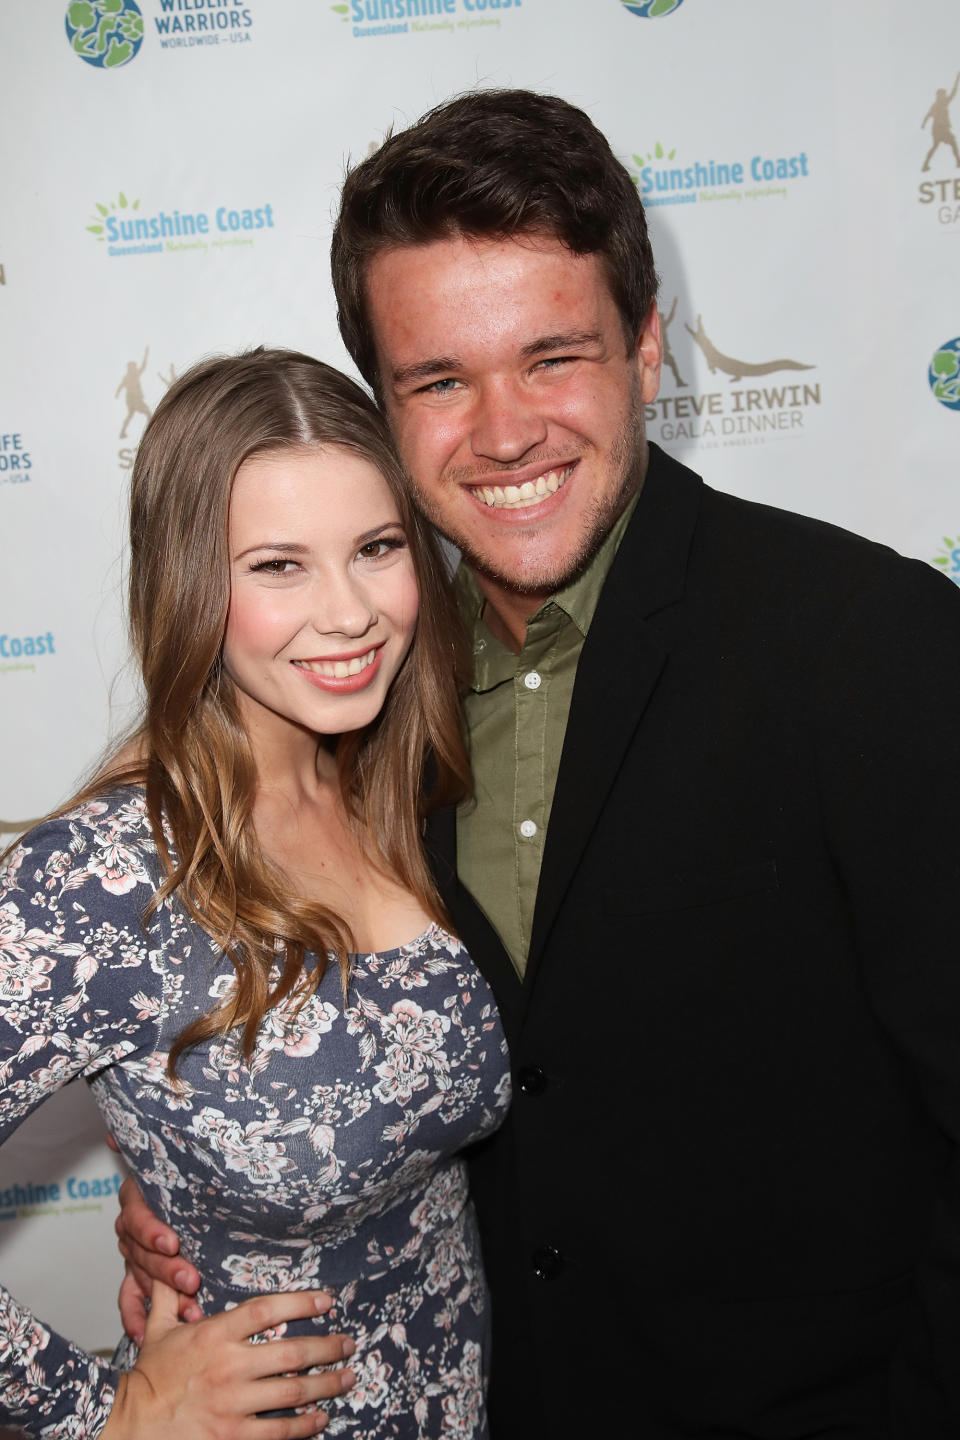 LOS ANGELES, CA - MAY 13:  (L-R) Bindi Irwin and Chandler Powell attend the Steve Irwin Gala Dinner at the SLS Hotel at Beverly Hills on May 13, 2017 in Los Angeles, California.  (Photo by David Livingston/Getty Images)